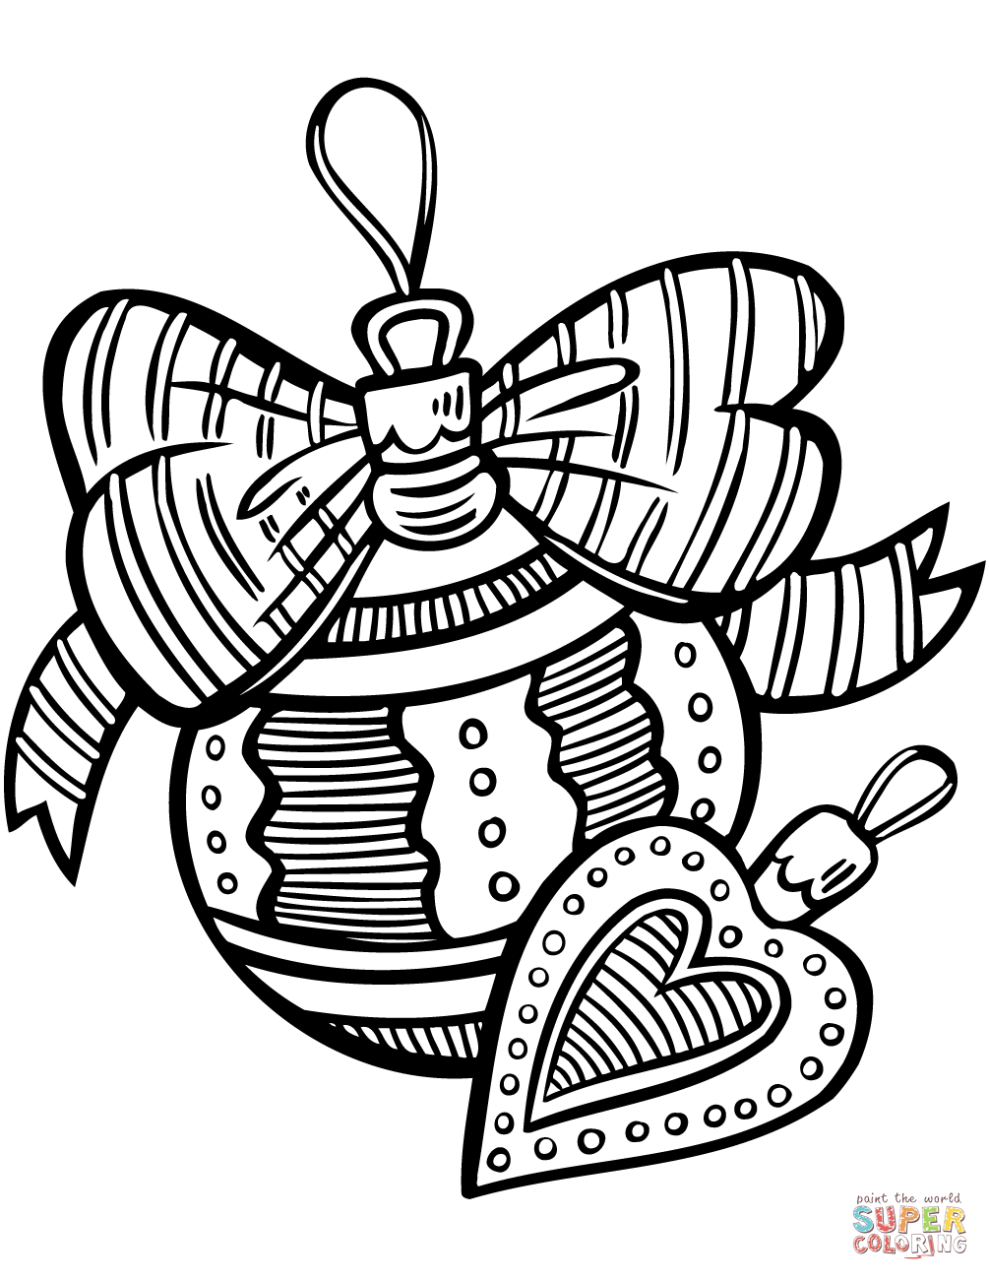 Christmas Ornaments coloring page Free Printable Coloring Pages